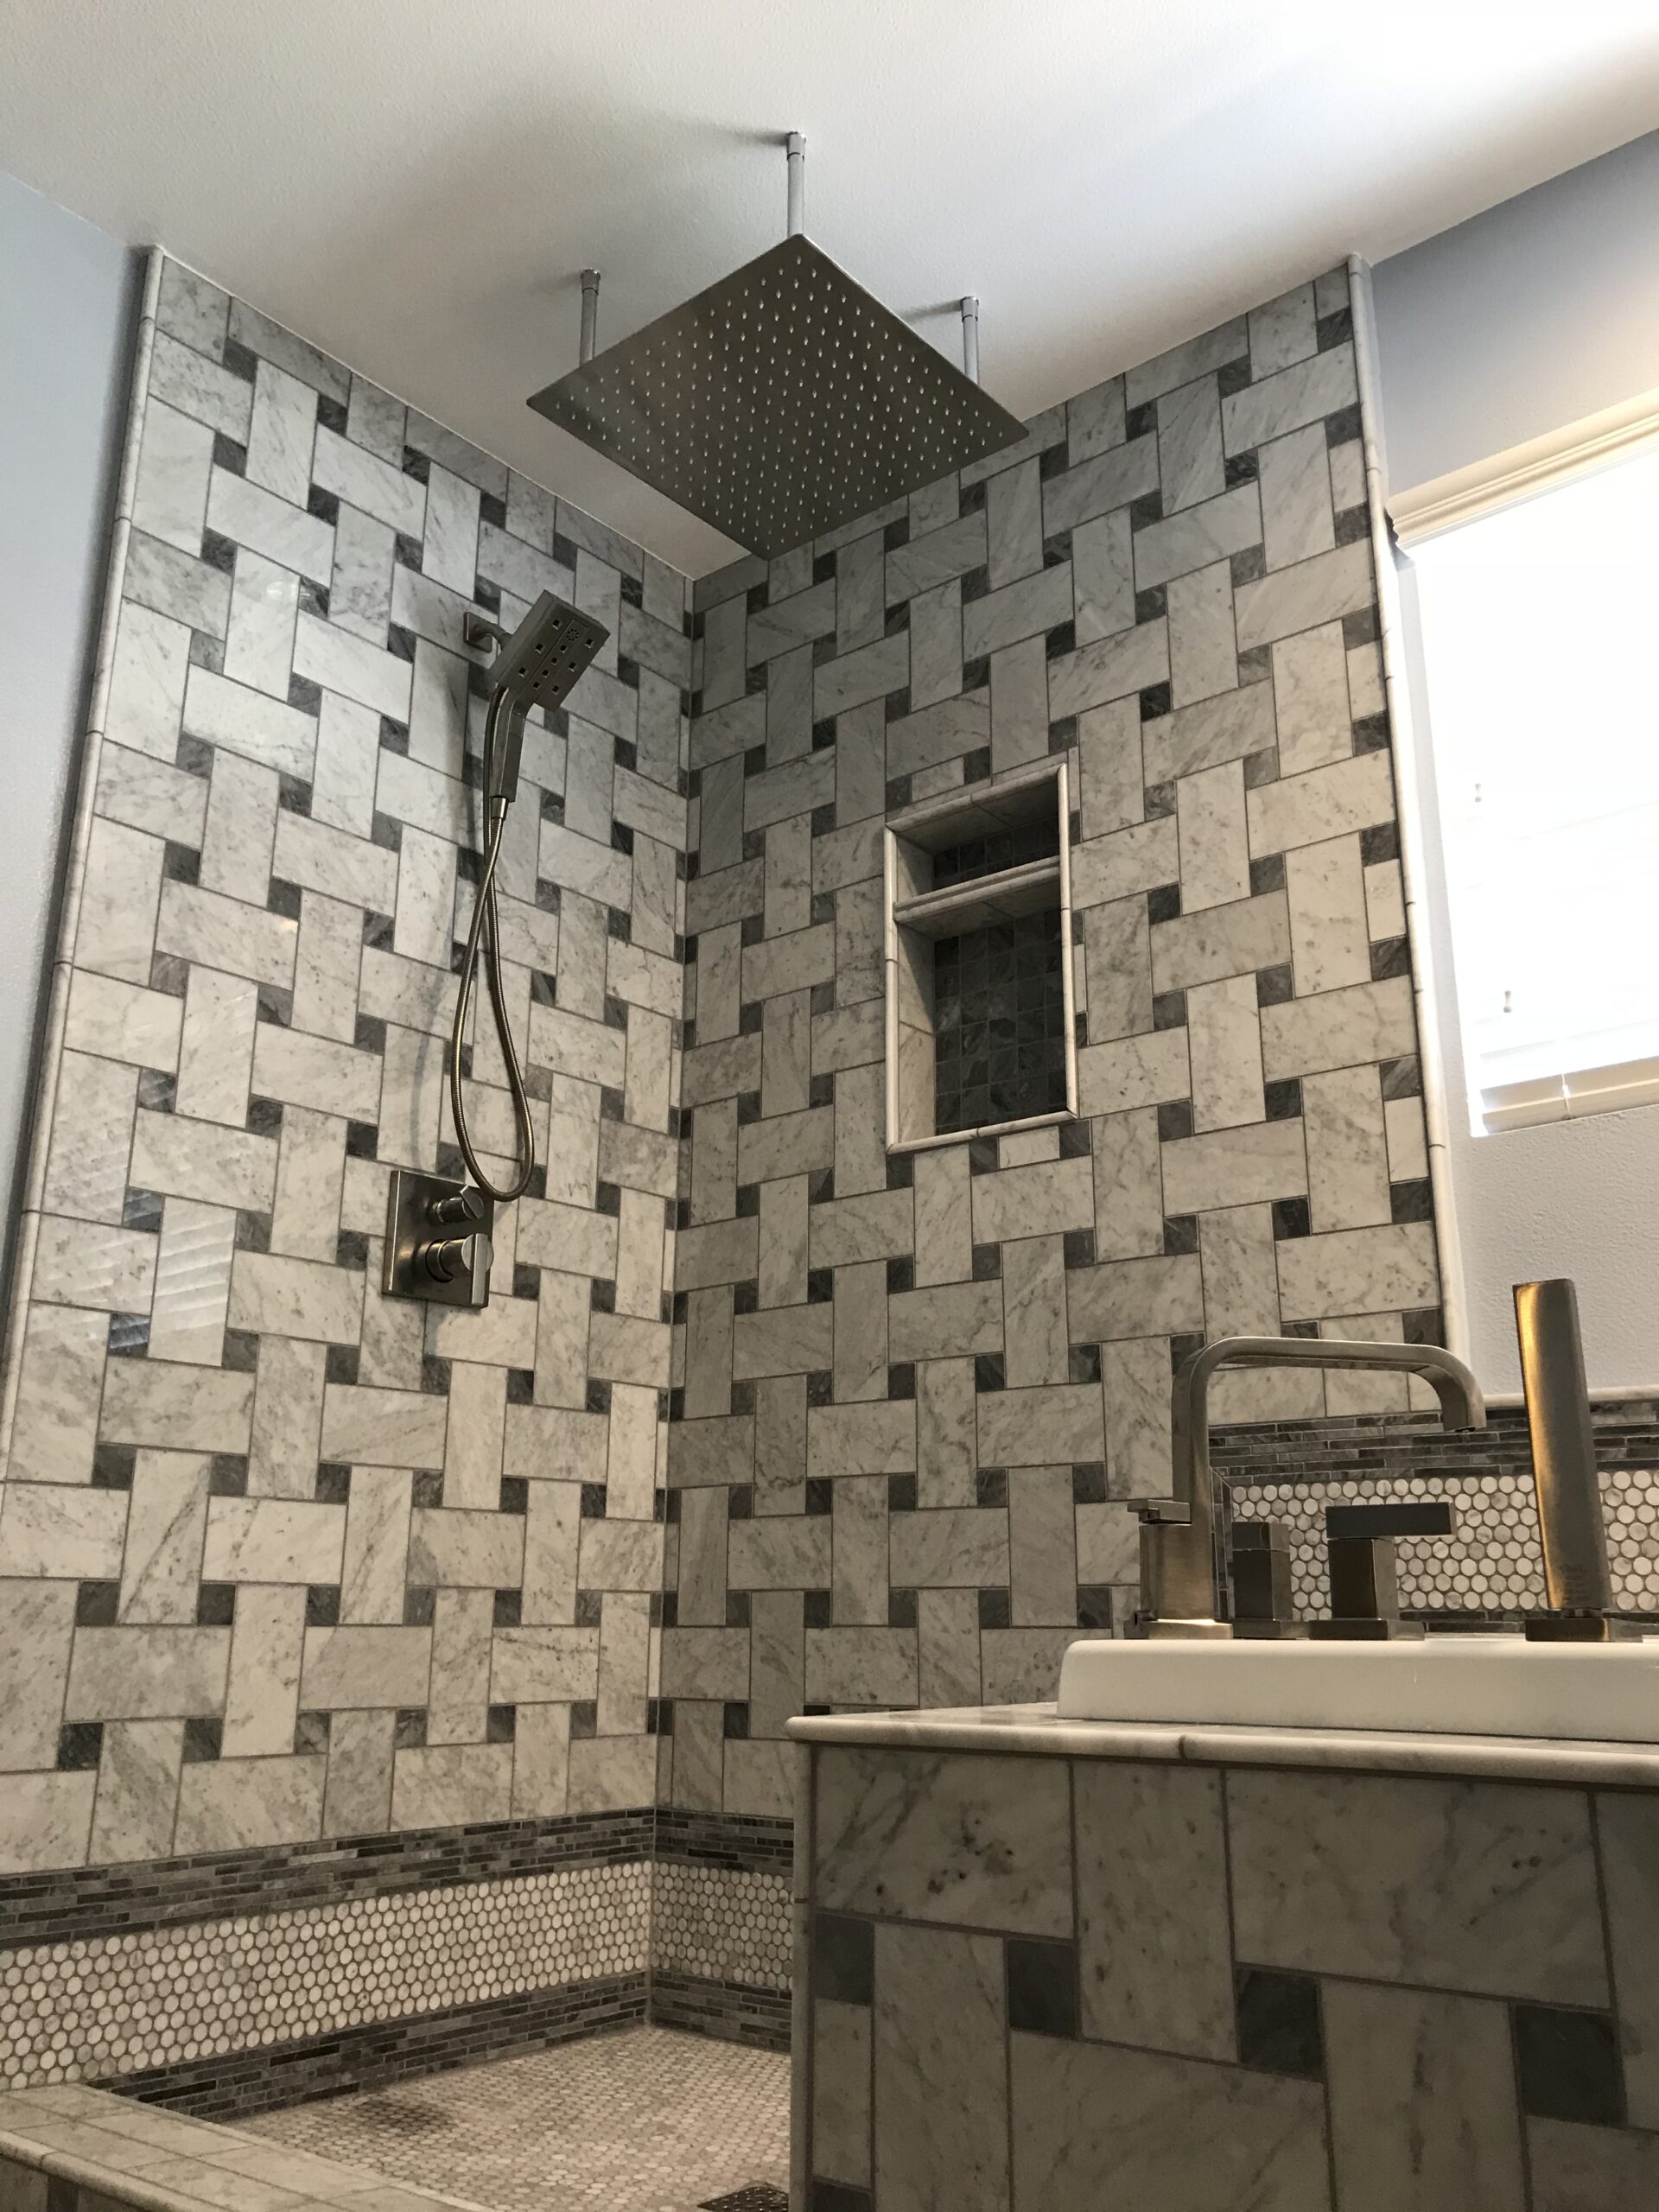 Why Choose Us for Your Bathroom Remodel?